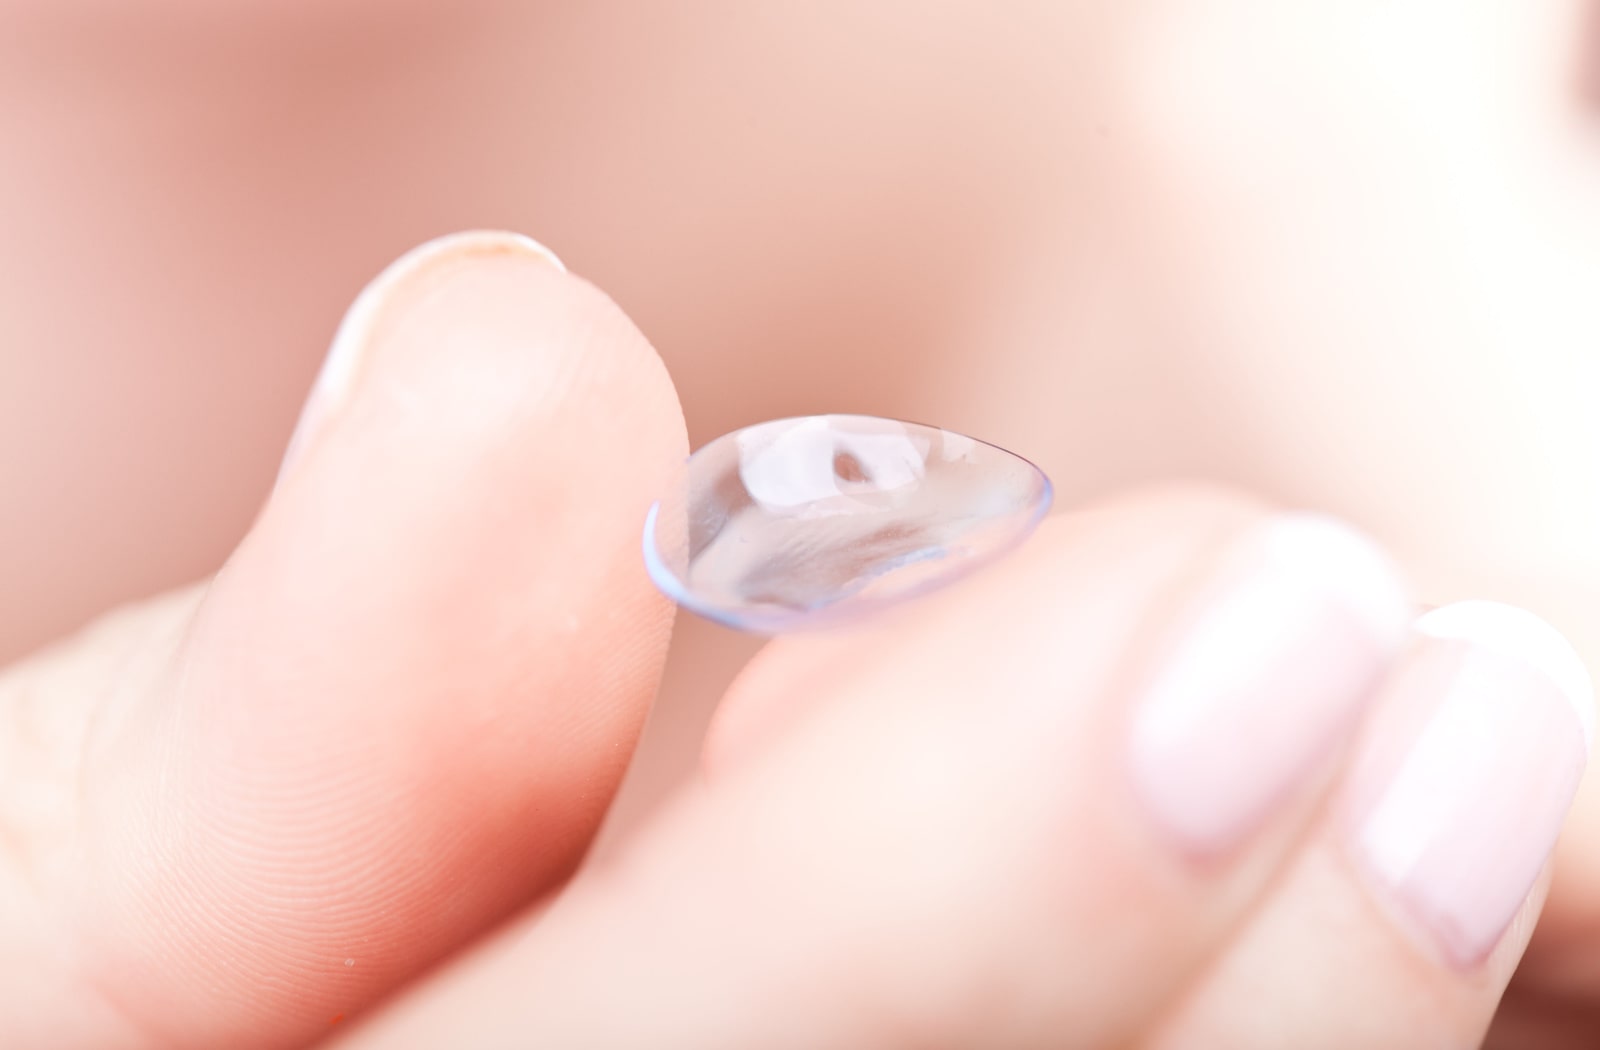 A close-up o a soft contact lens held at the tip of two human fingers. In more mild cases of dry eye, soft contact lenses are sometimes suitable